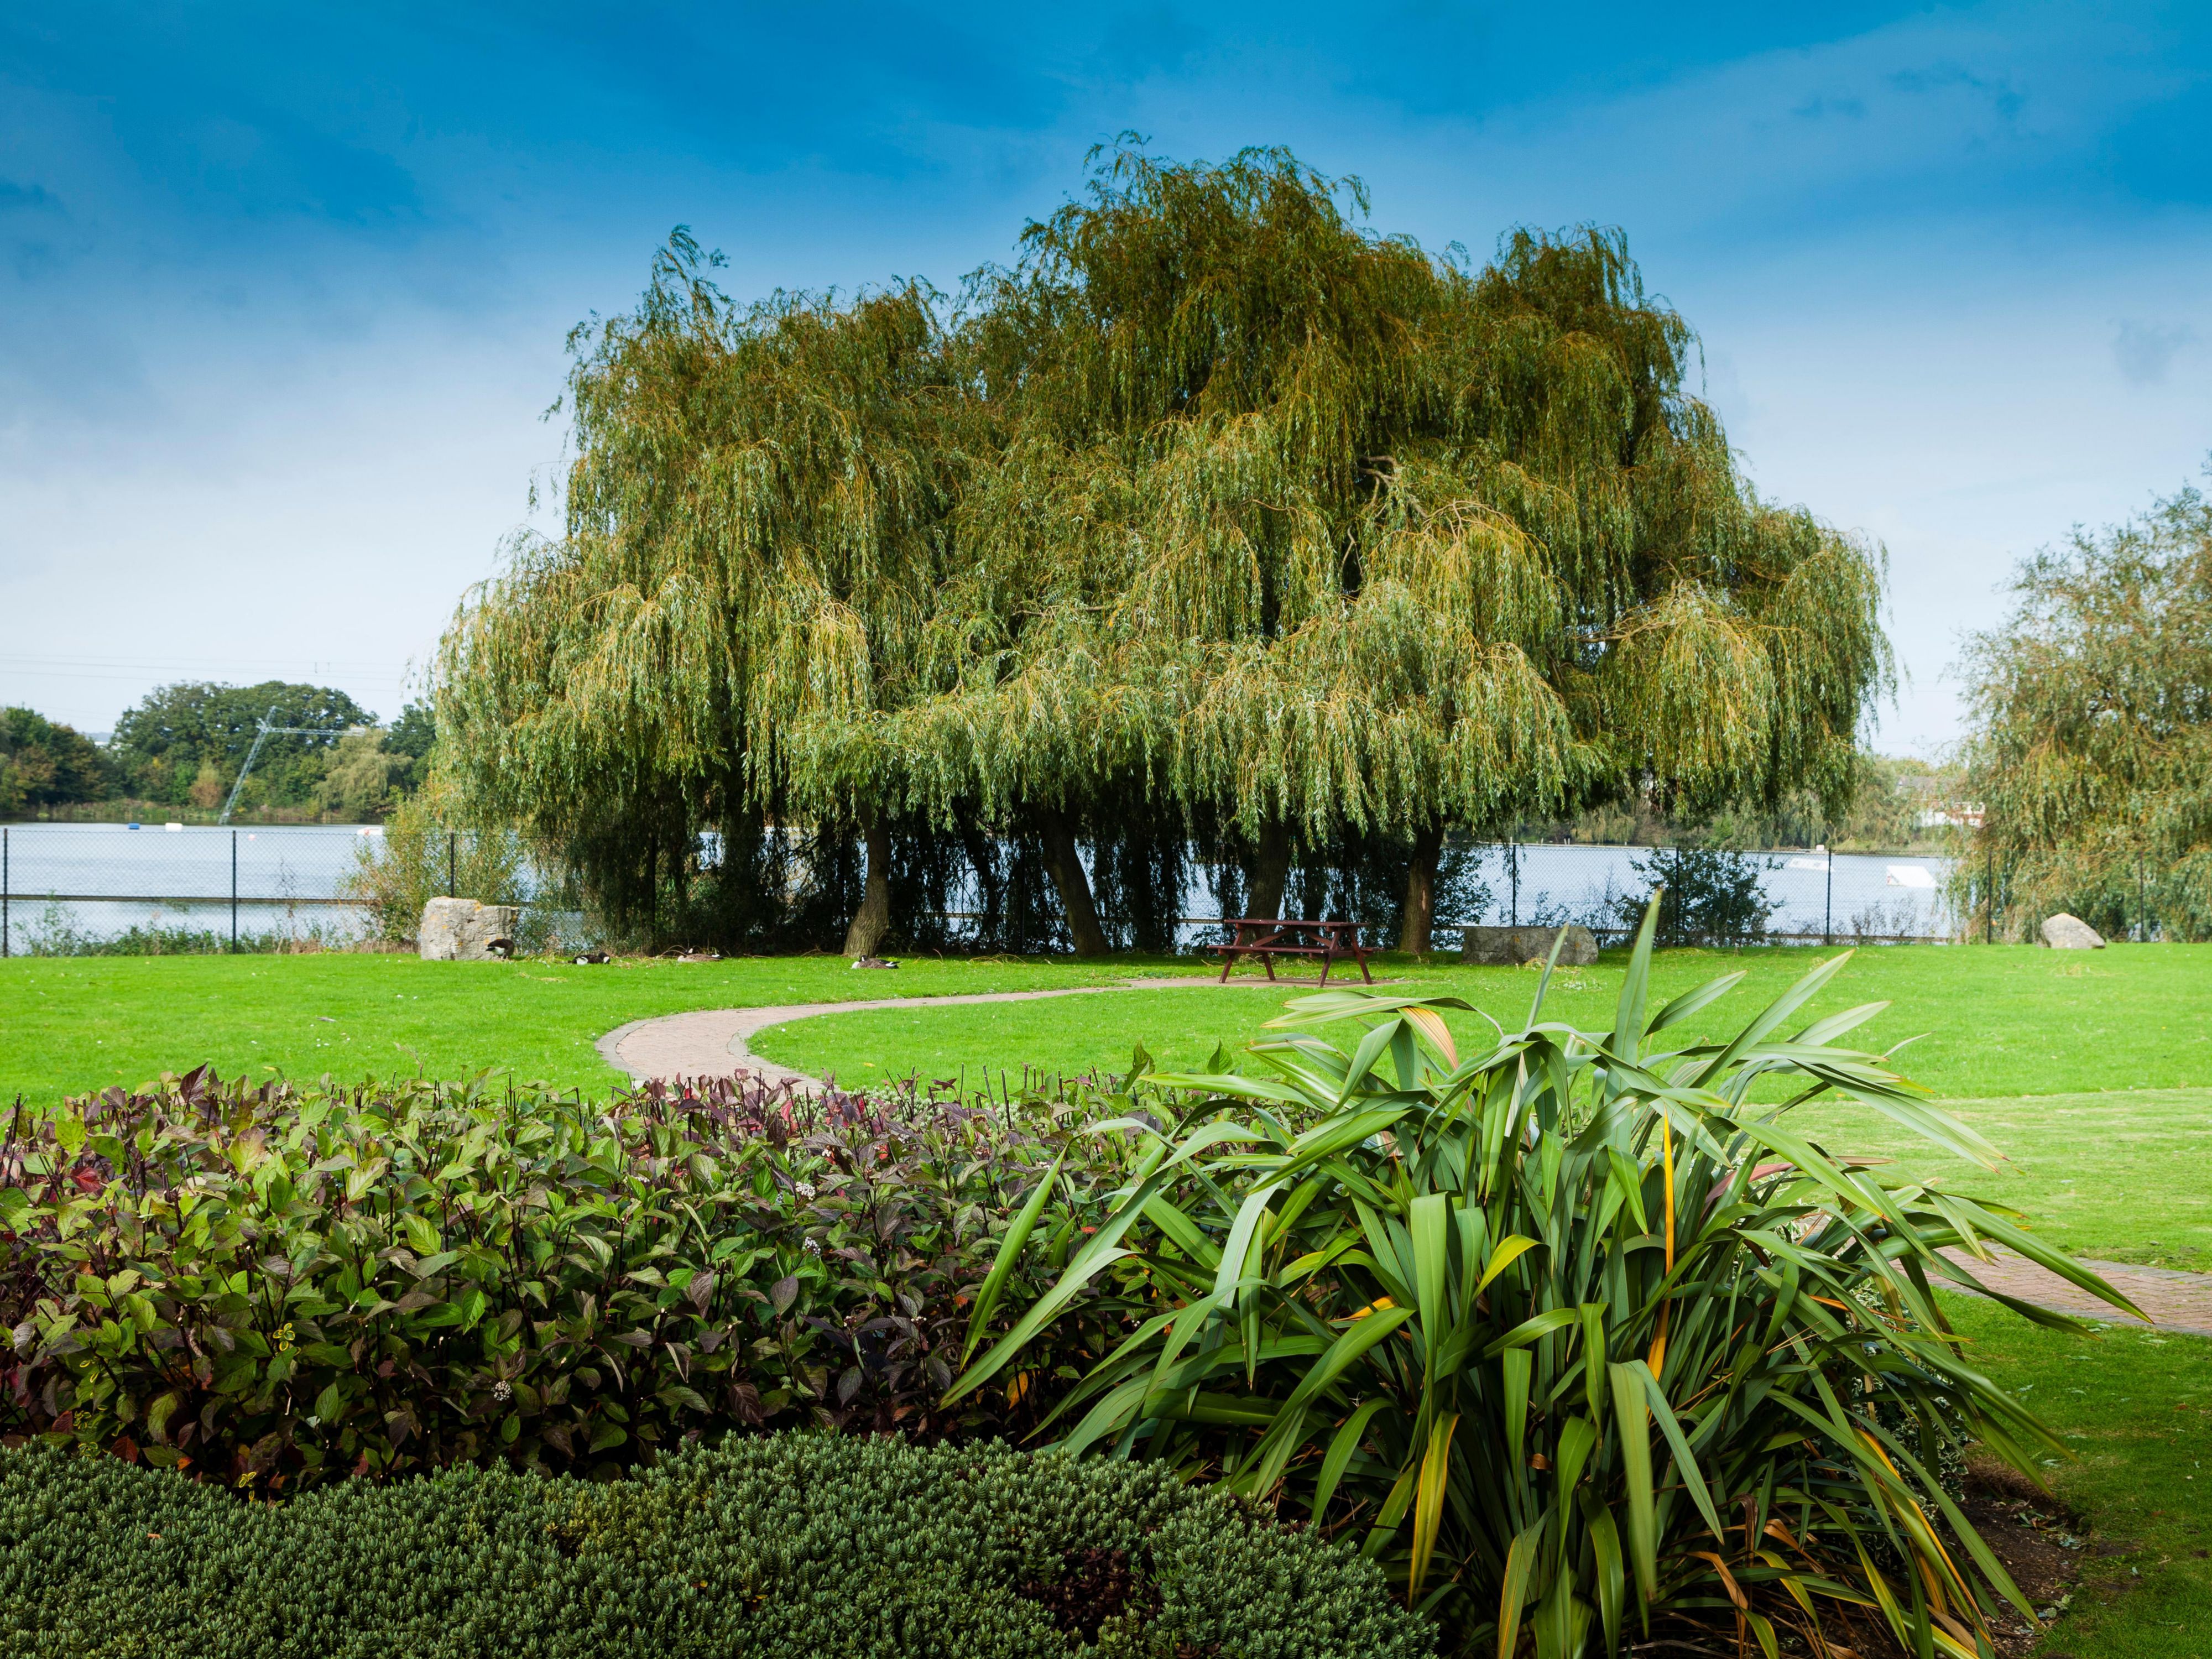 The hotel boasts a lakeside garden, perfect for weddings, outdoor events and team building activity days.